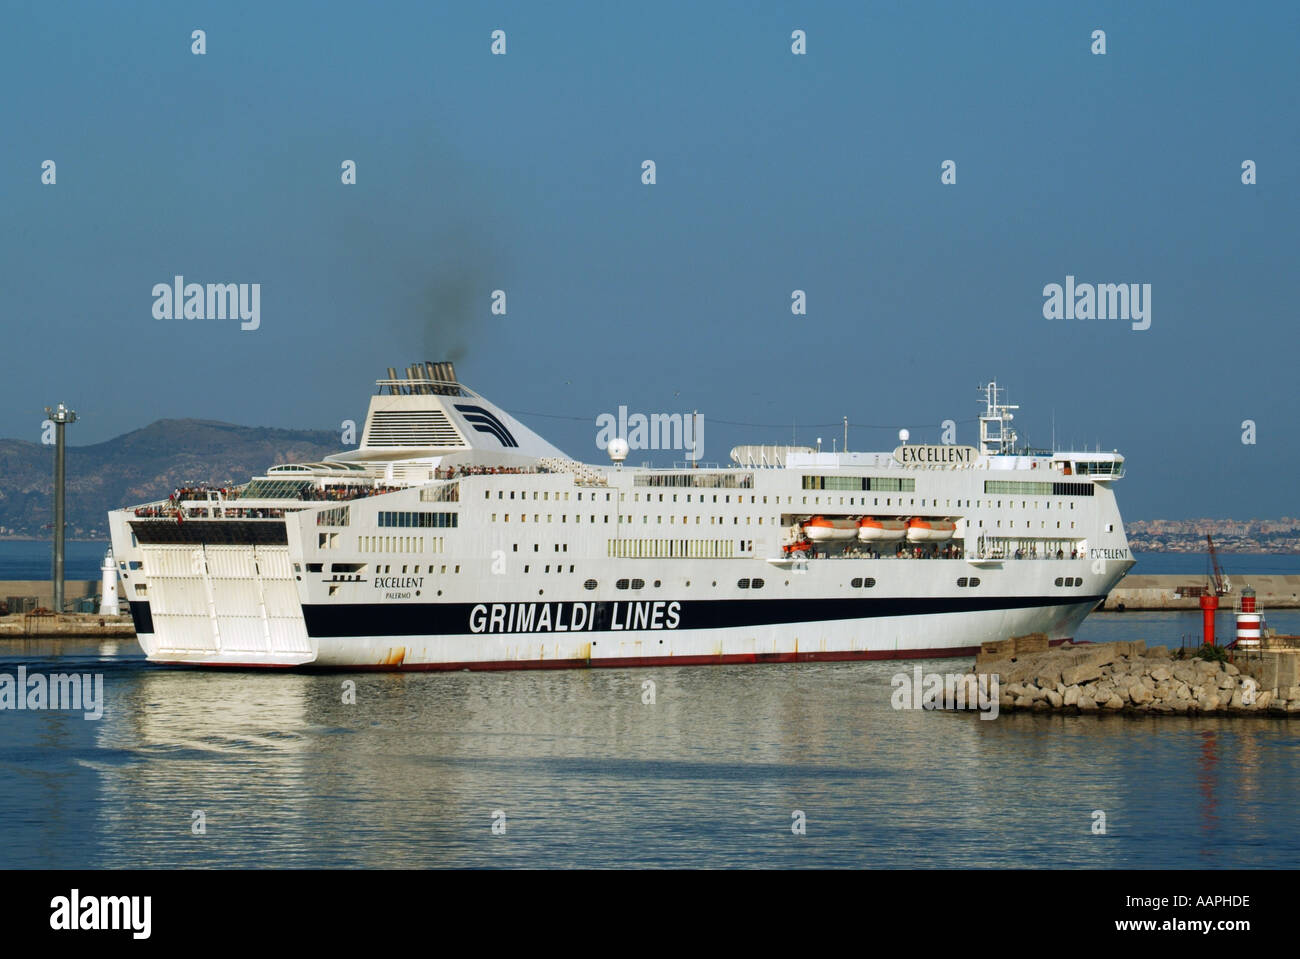 Palermo Sicily ferry Excellent departing port Stock Photo: 4139485 - Alamy